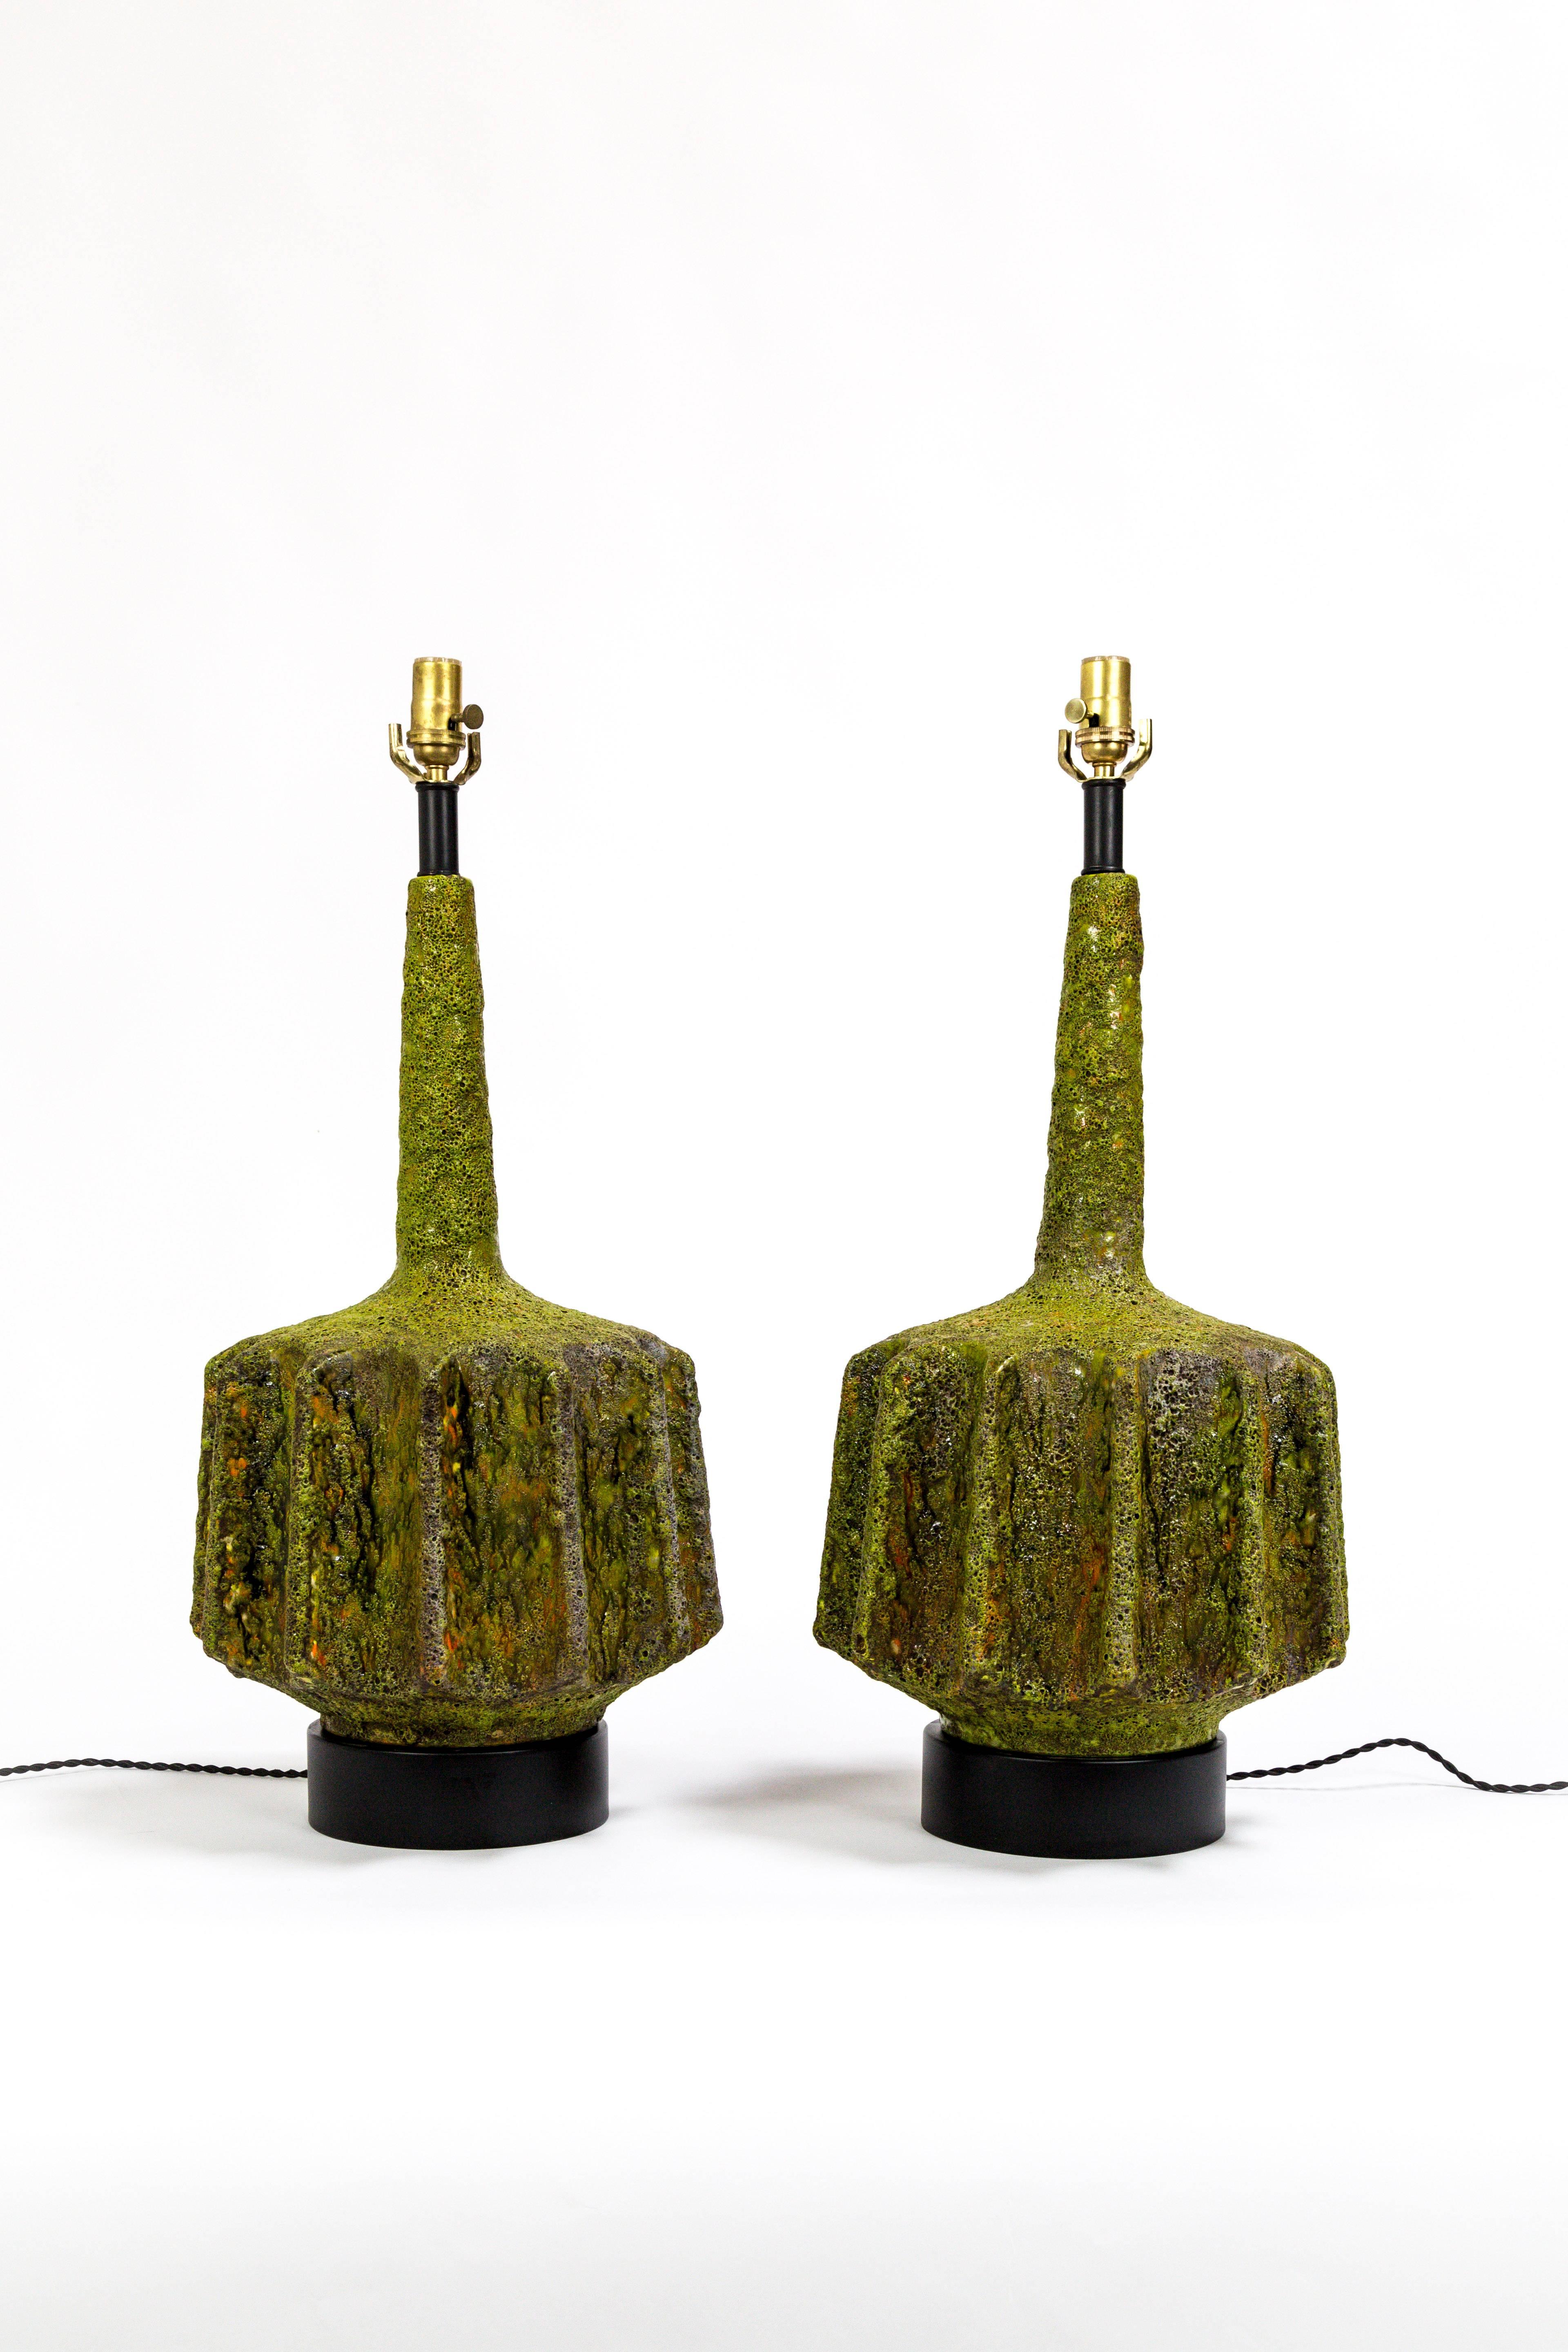 These striking lamps were designed by Marcello Fantoni; a beautiful shape with scalloped sides.  Monumental, fat lava glazed ceramic in multifaceted green with hints of orange and yellow.  Newly wired with black, rayon covered twisted cord.  Italy,